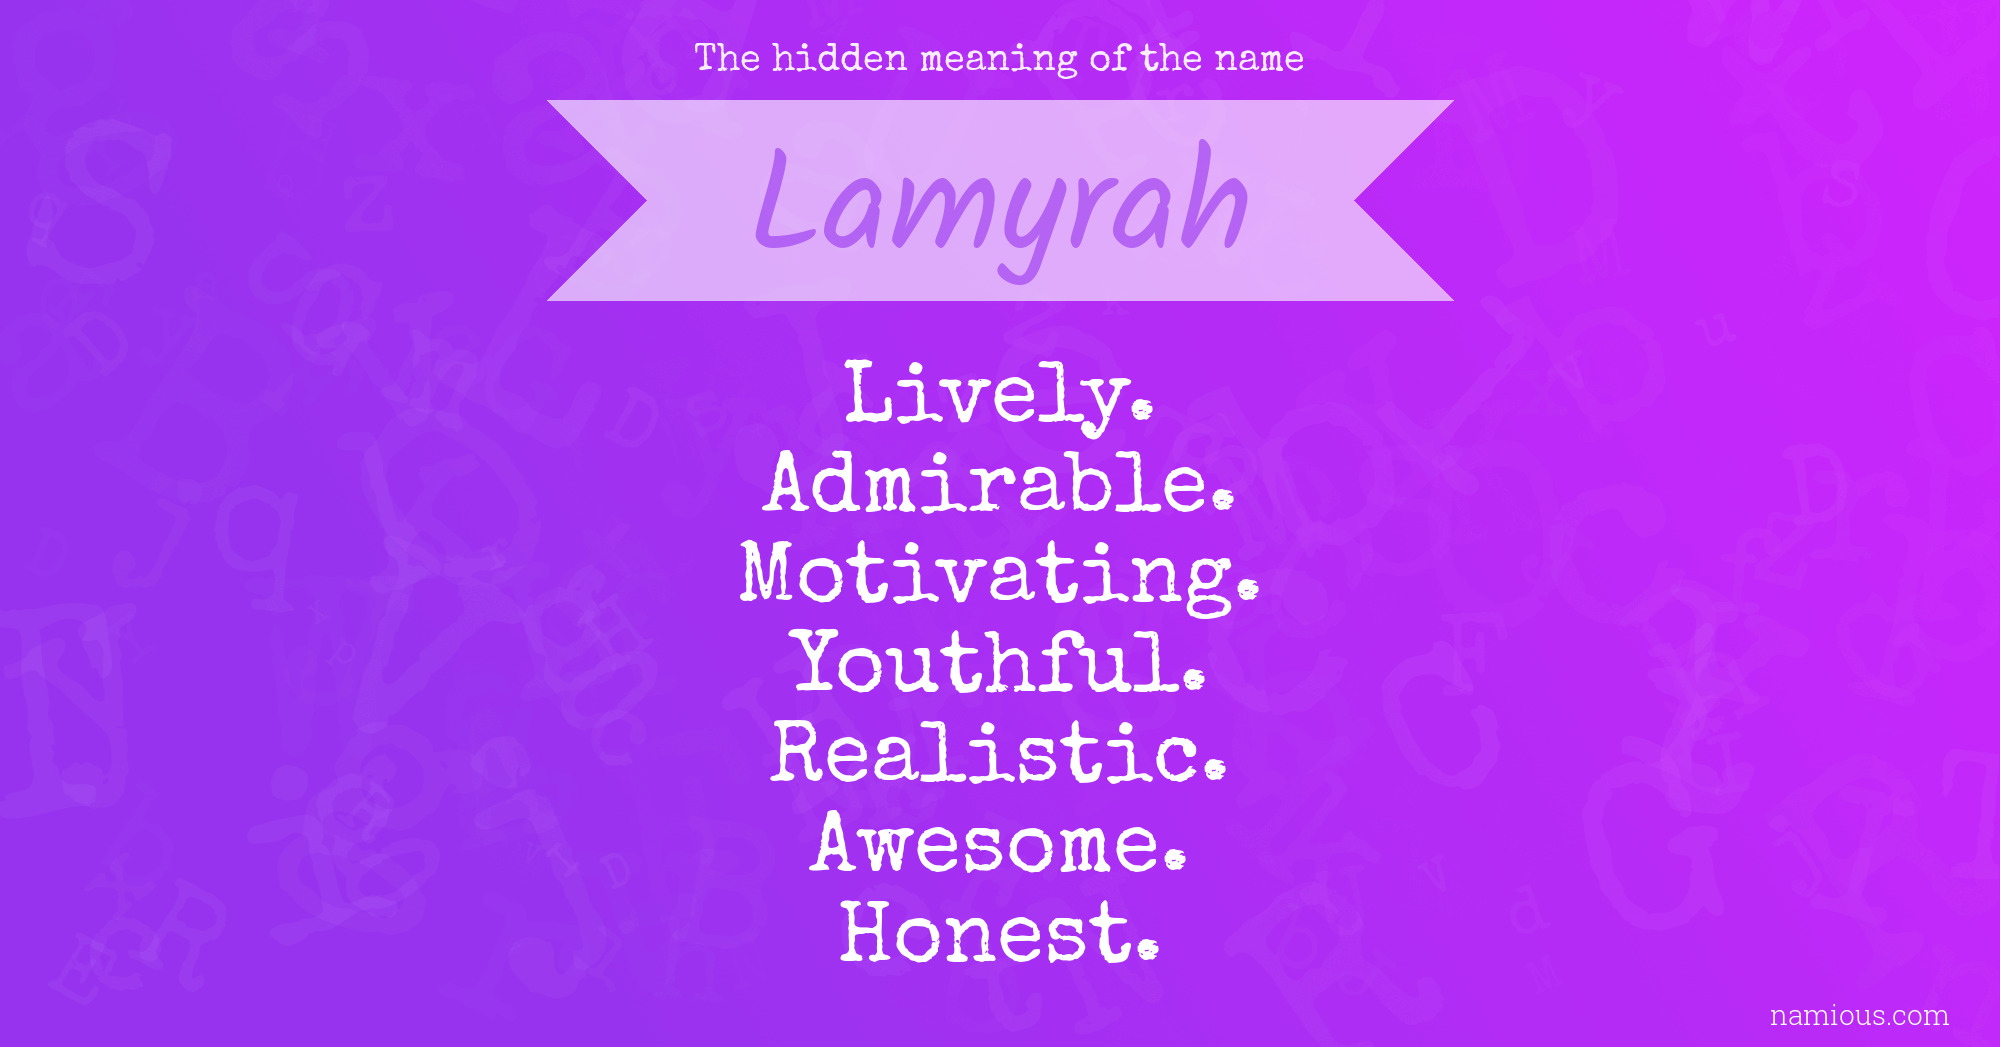 The hidden meaning of the name Lamyrah